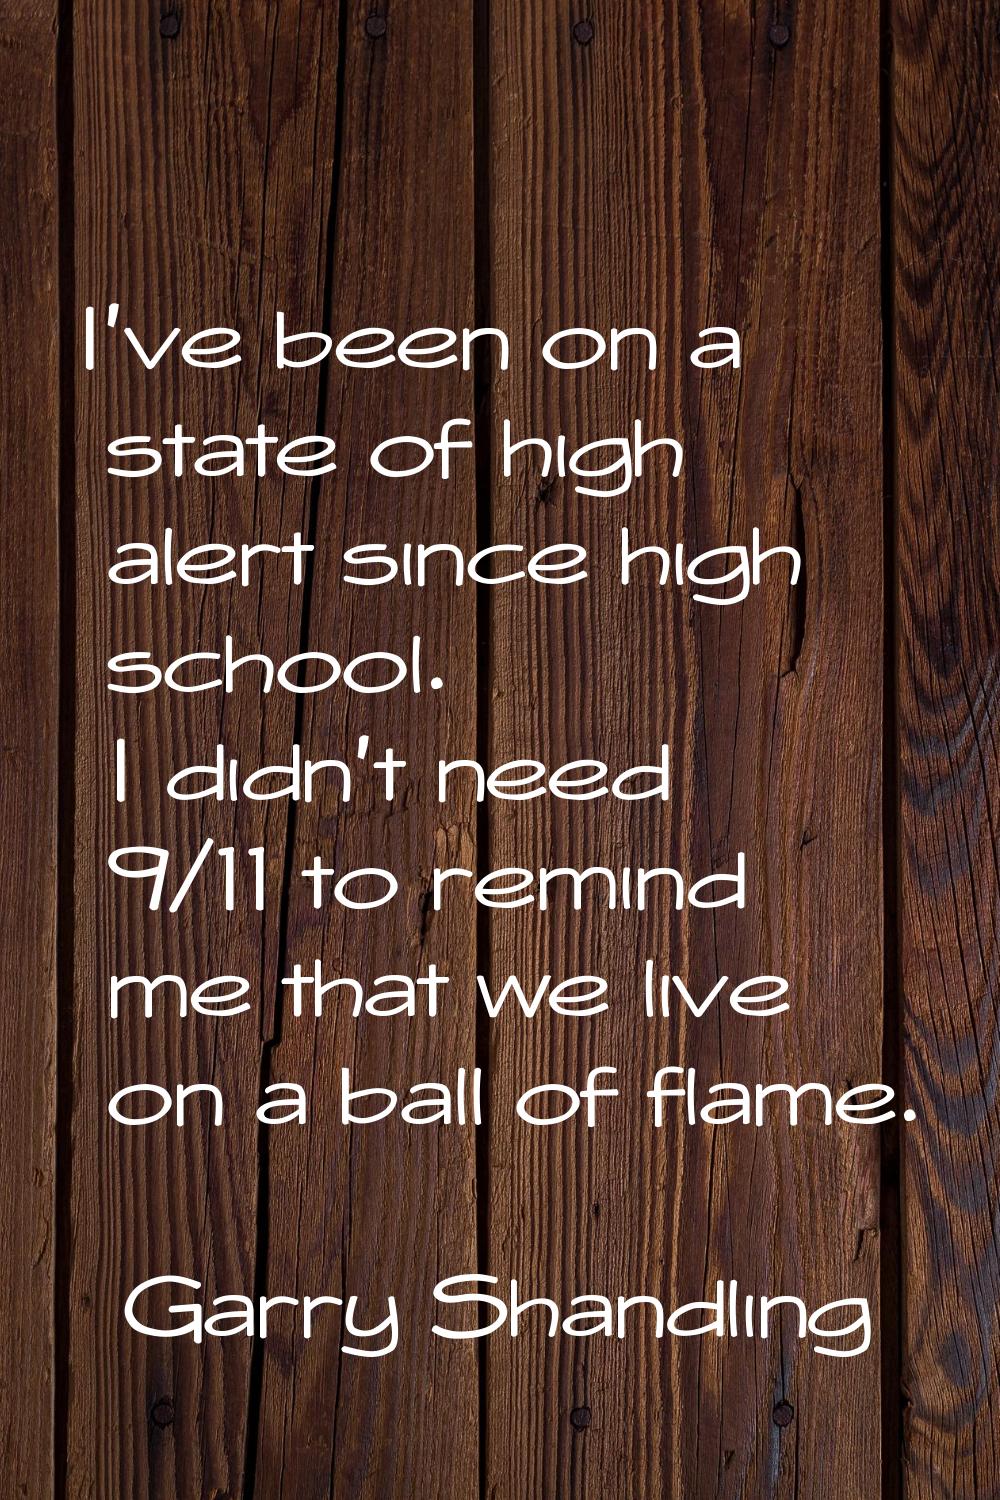 I've been on a state of high alert since high school. I didn't need 9/11 to remind me that we live 